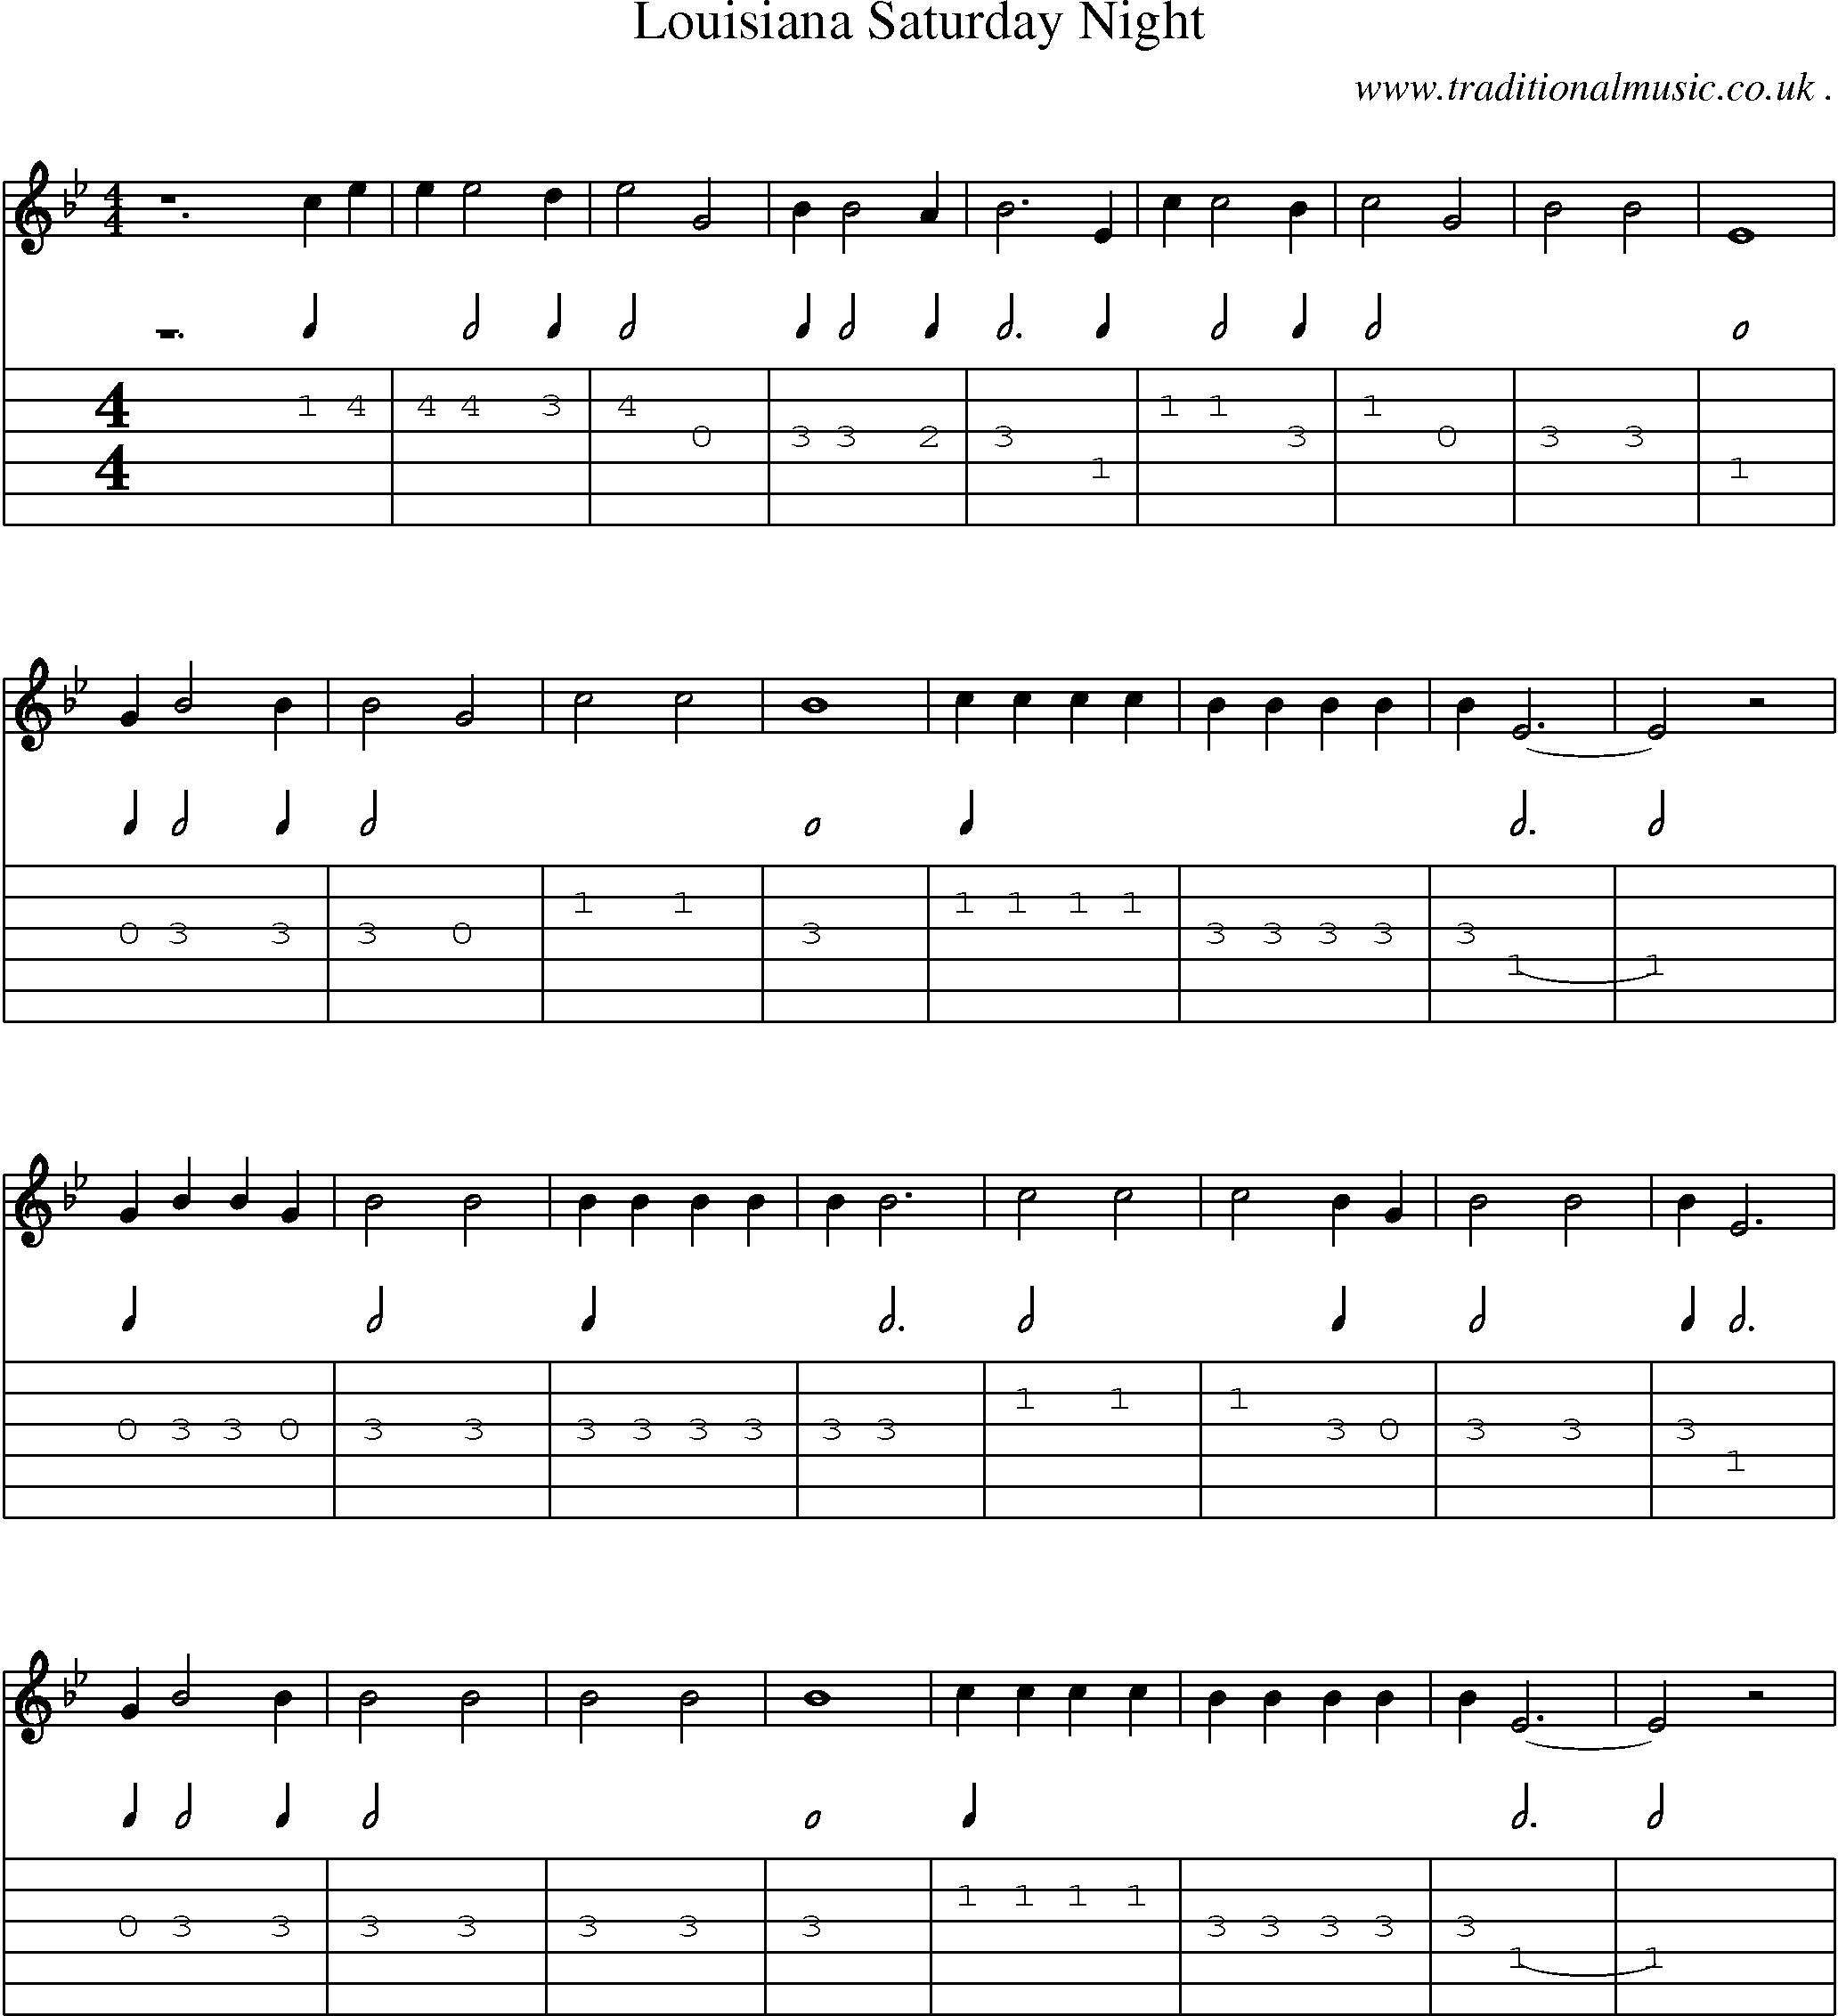 Music Score and Guitar Tabs for Louisiana Saturday Night